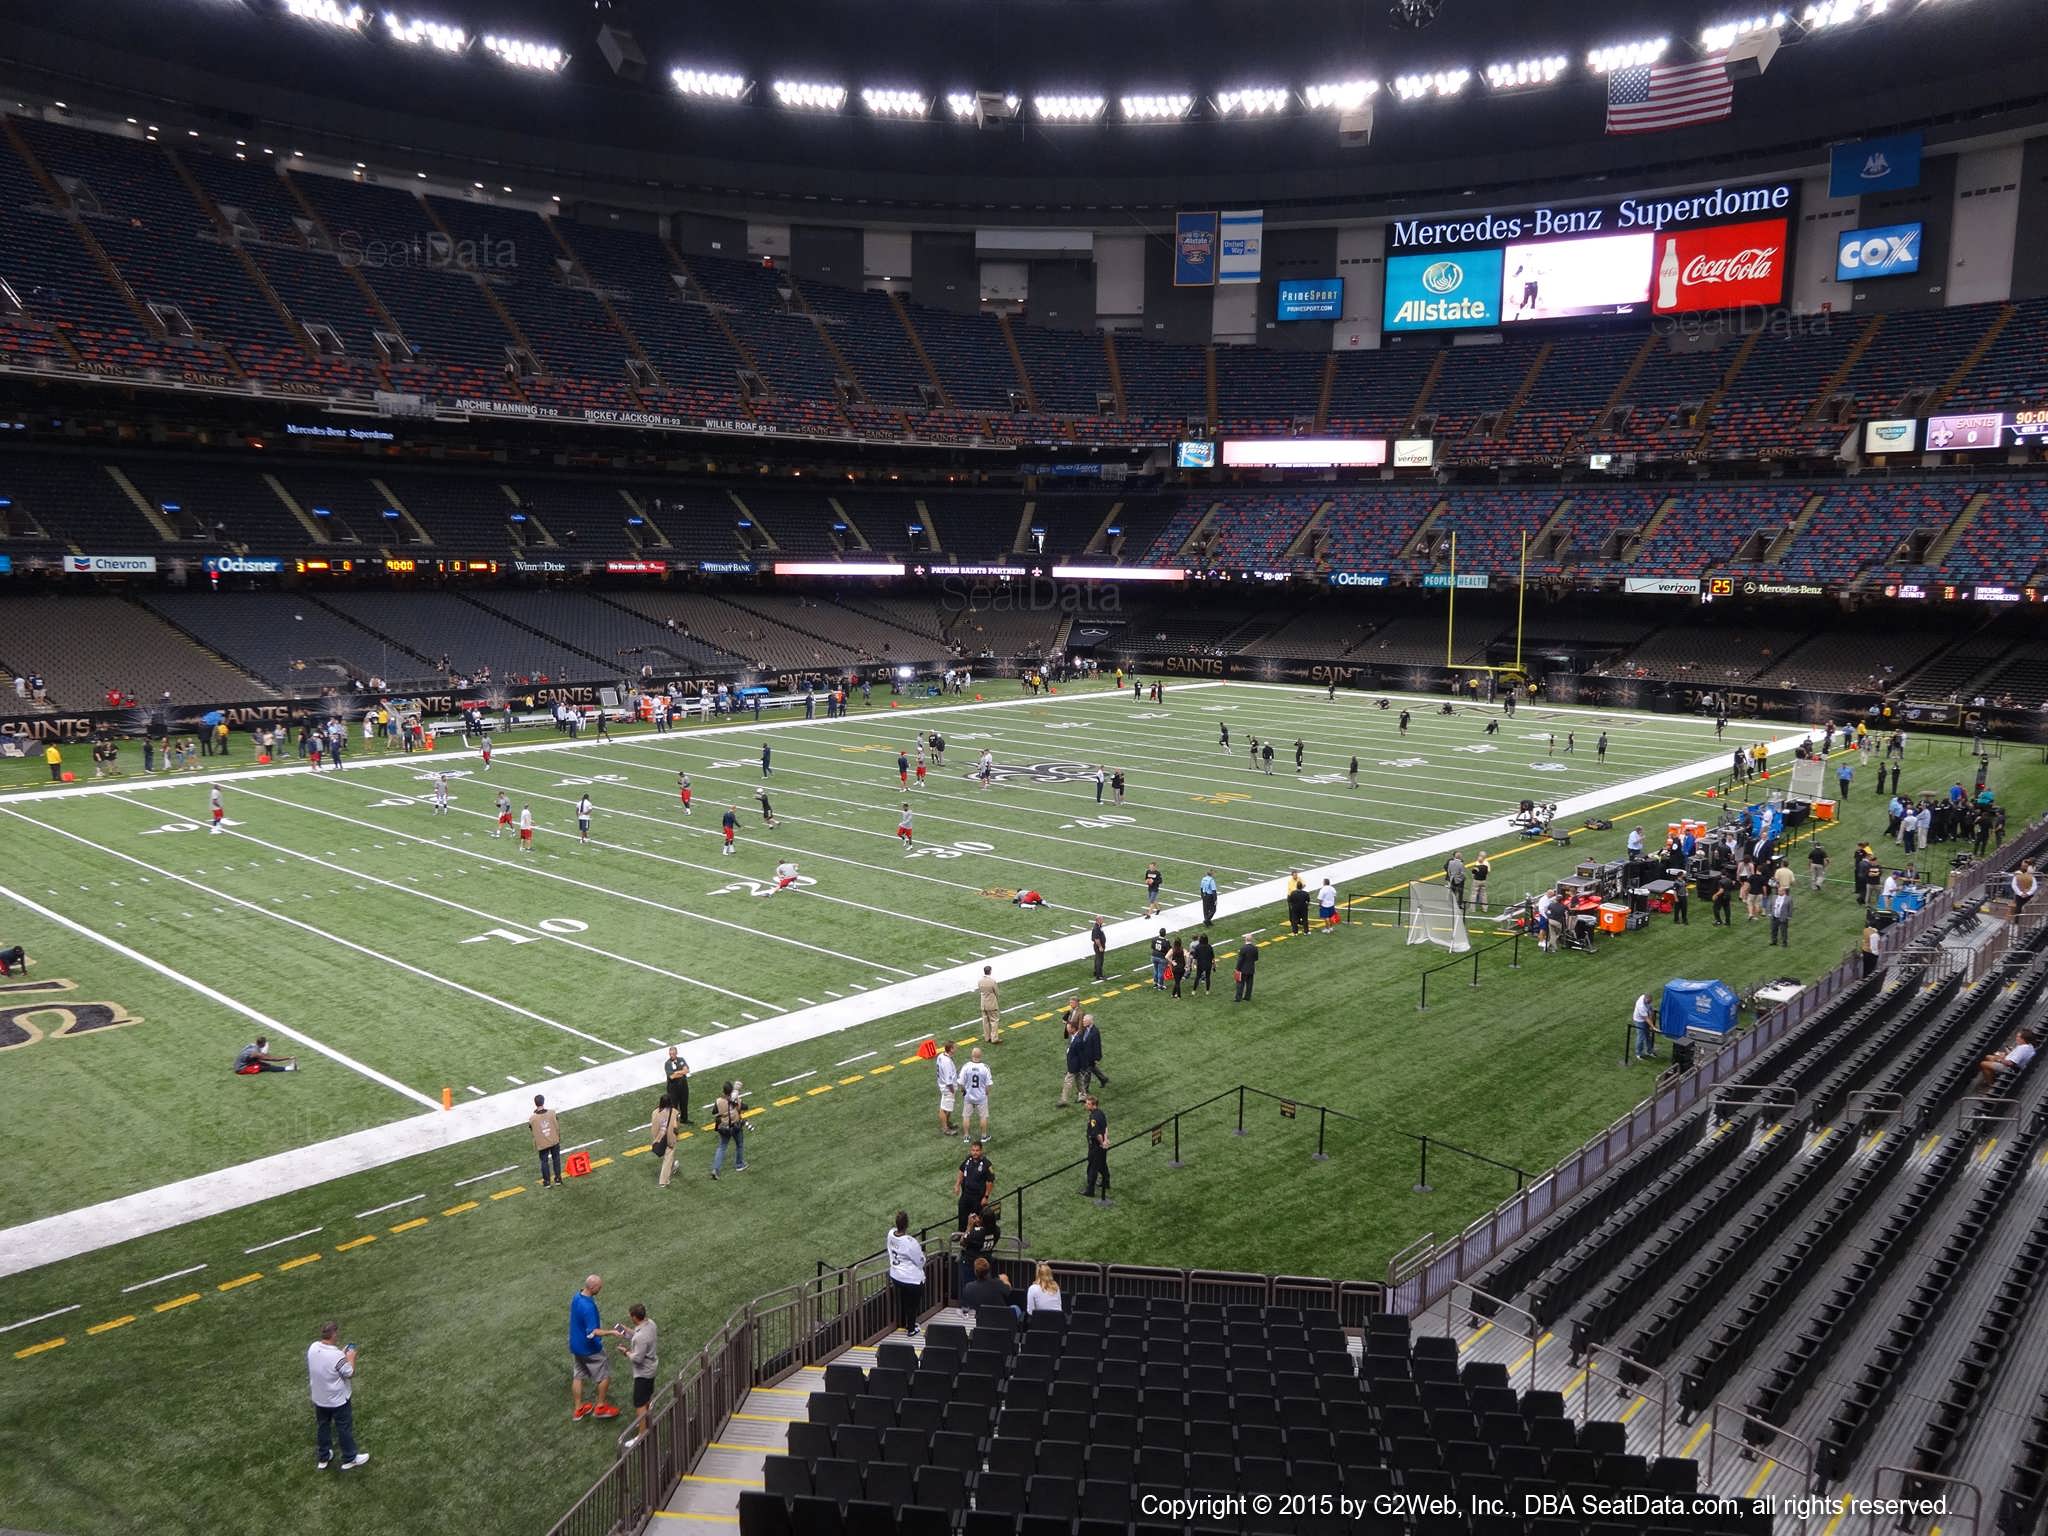 Seat view from section 275 at the Mercedes-Benz Superdome, home of the New Orleans Saints